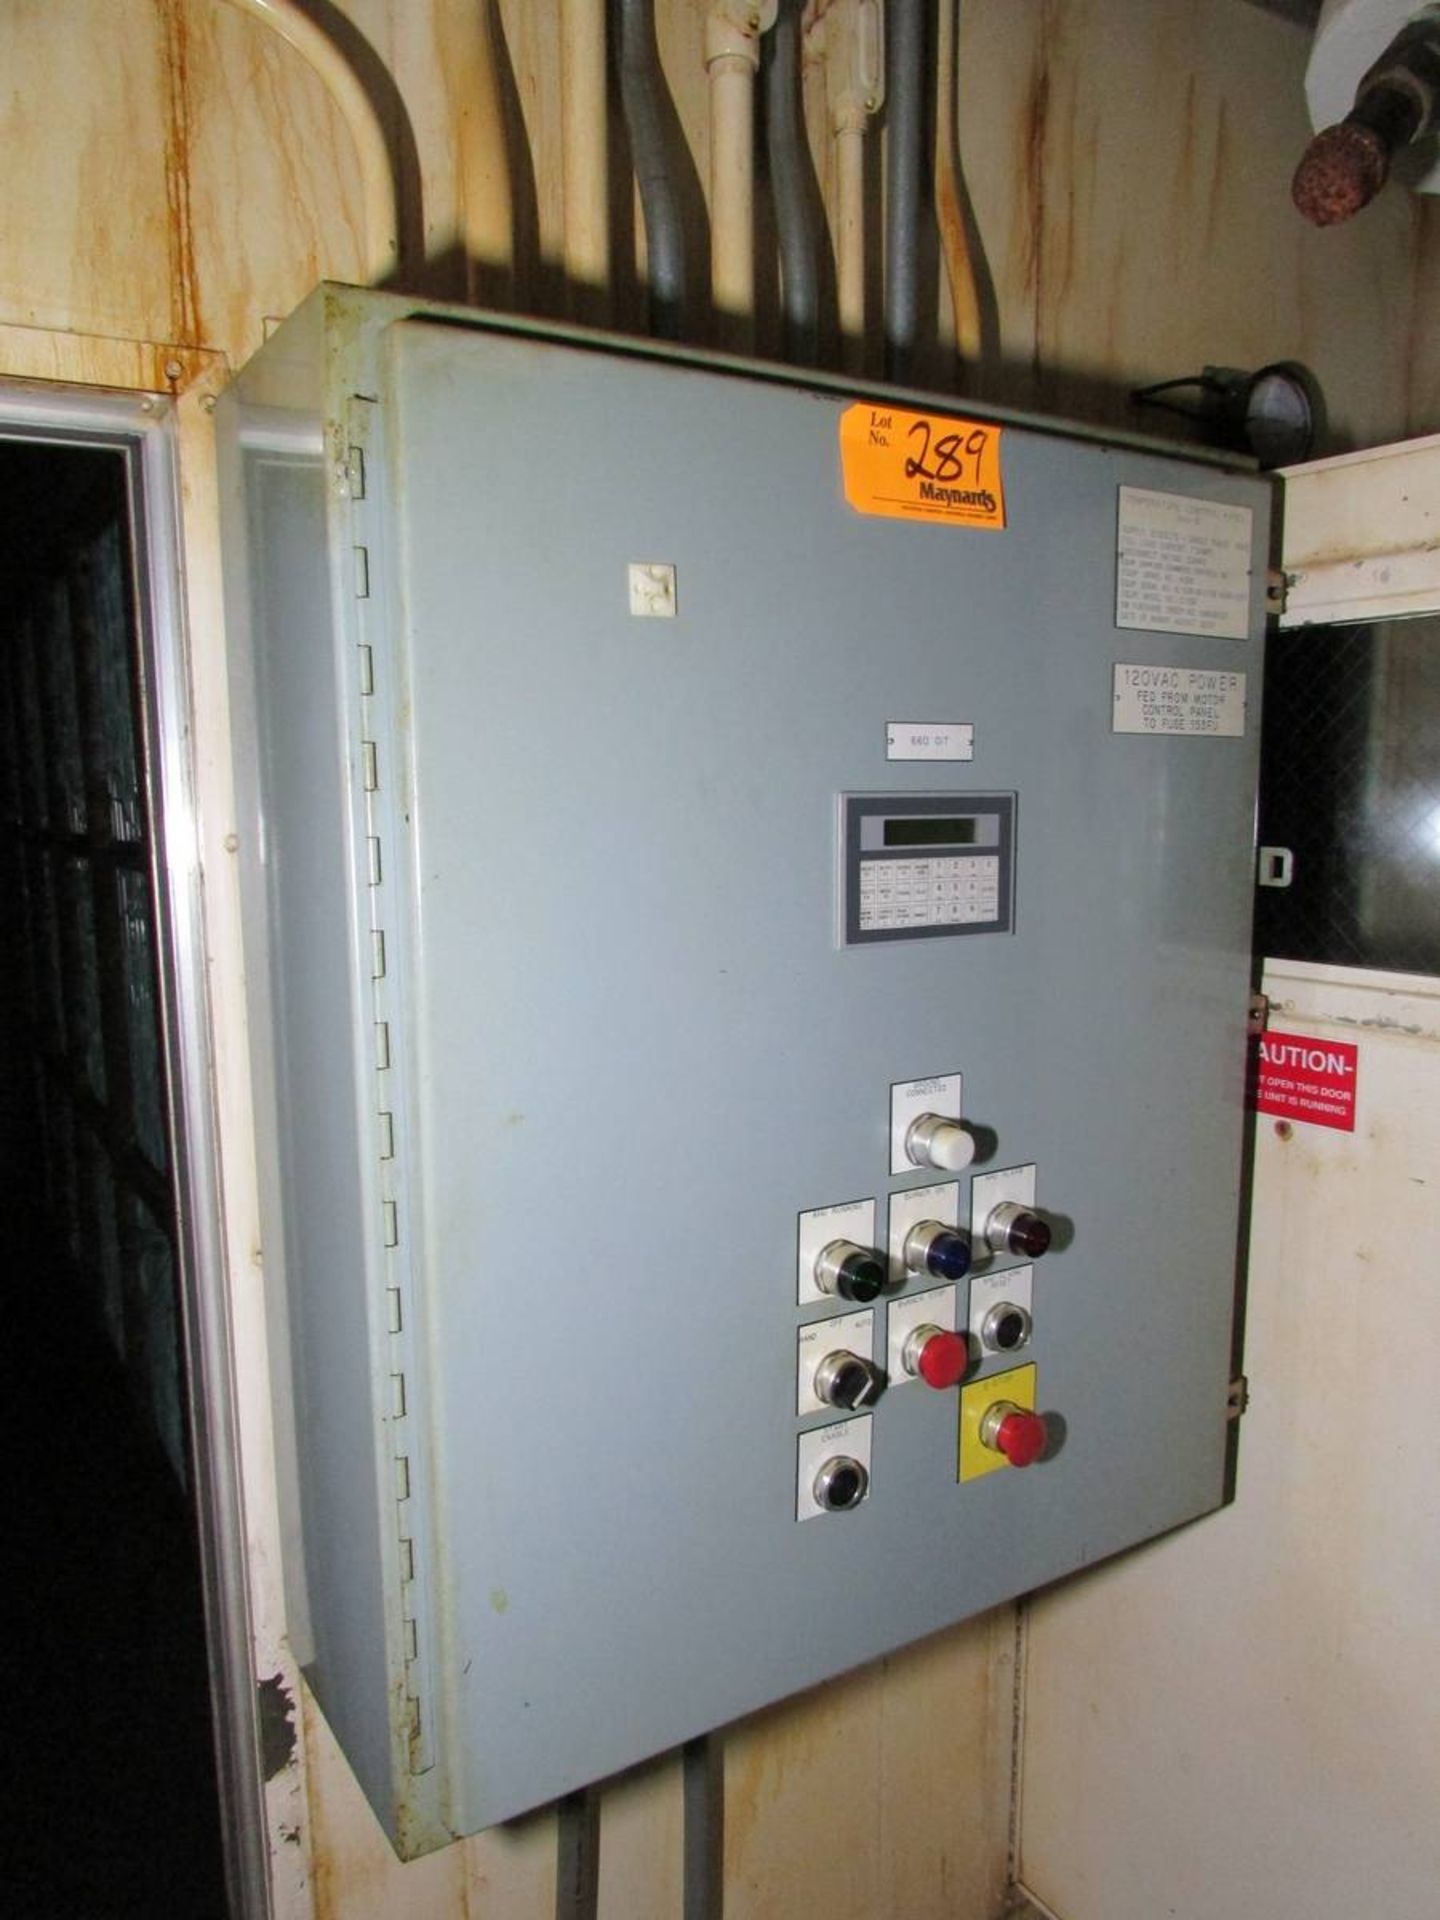 2000 Webco CUS-35 Overhead Air Handling Unit - Image 14 of 16